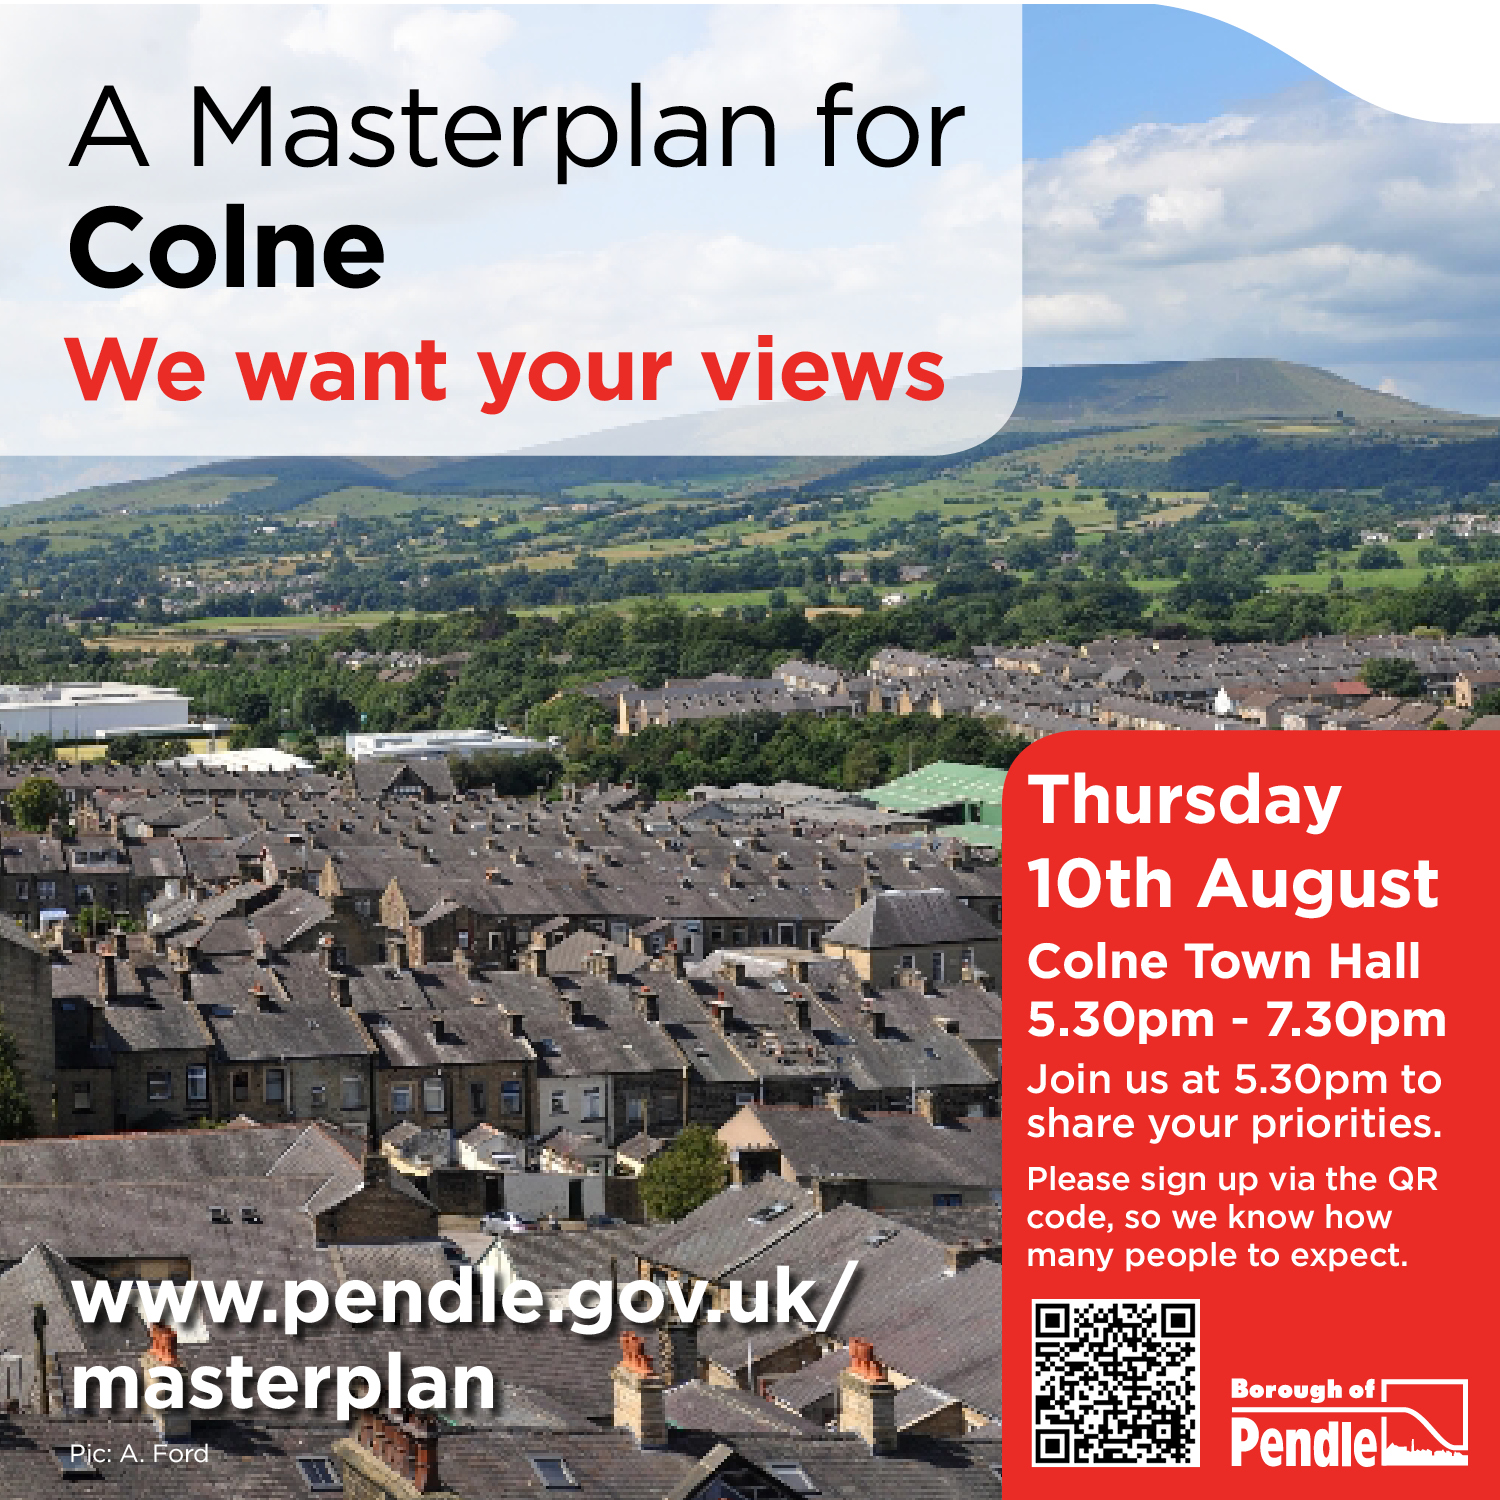 Date set to have your say on Colne Masterplan